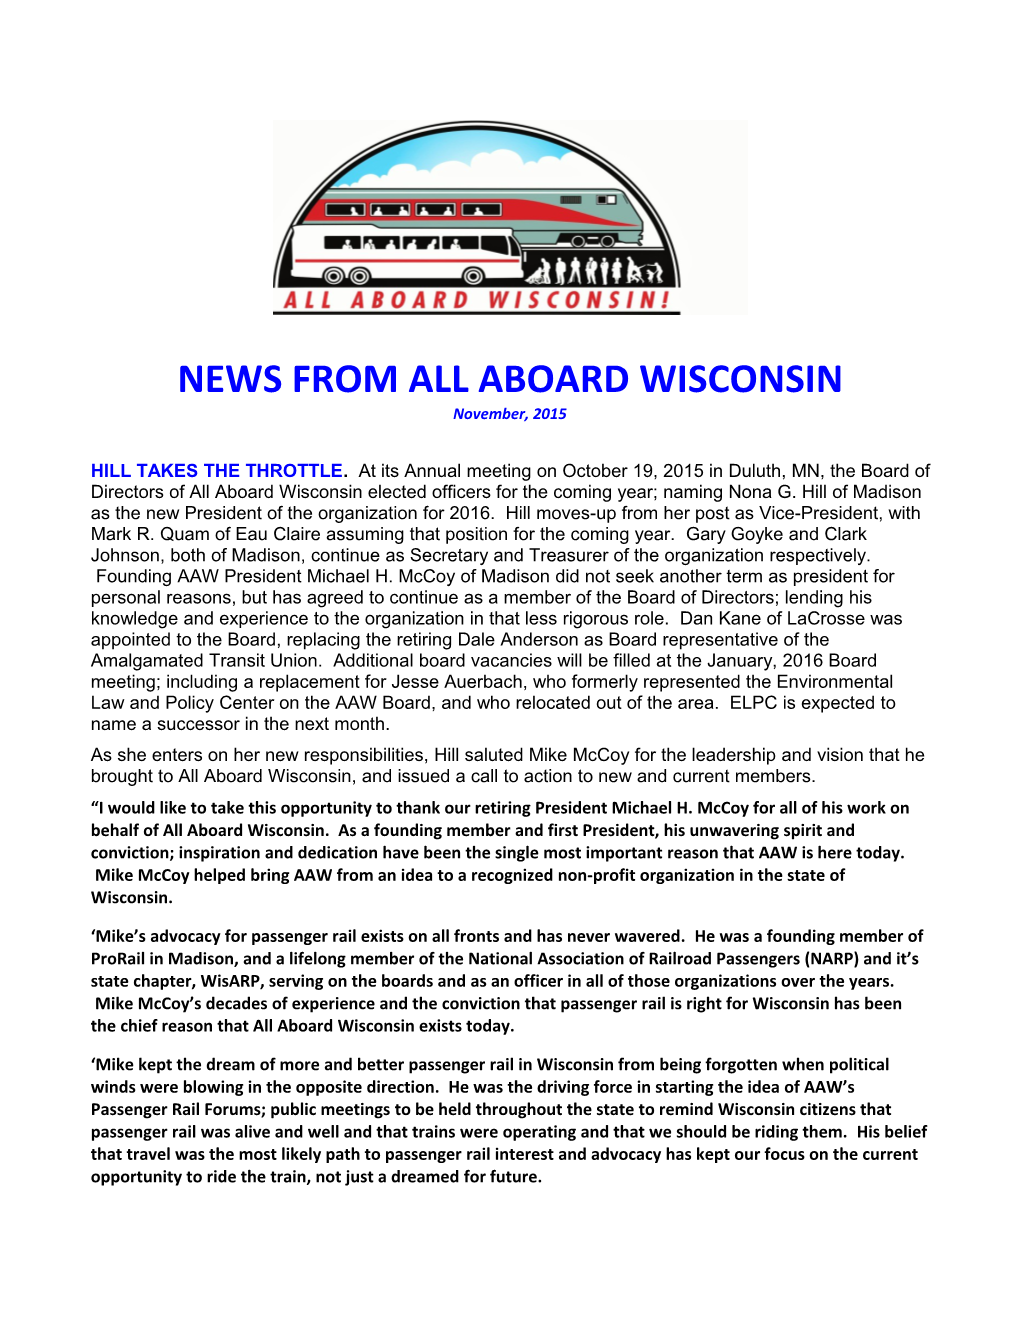 News from All Aboard Wisconsin